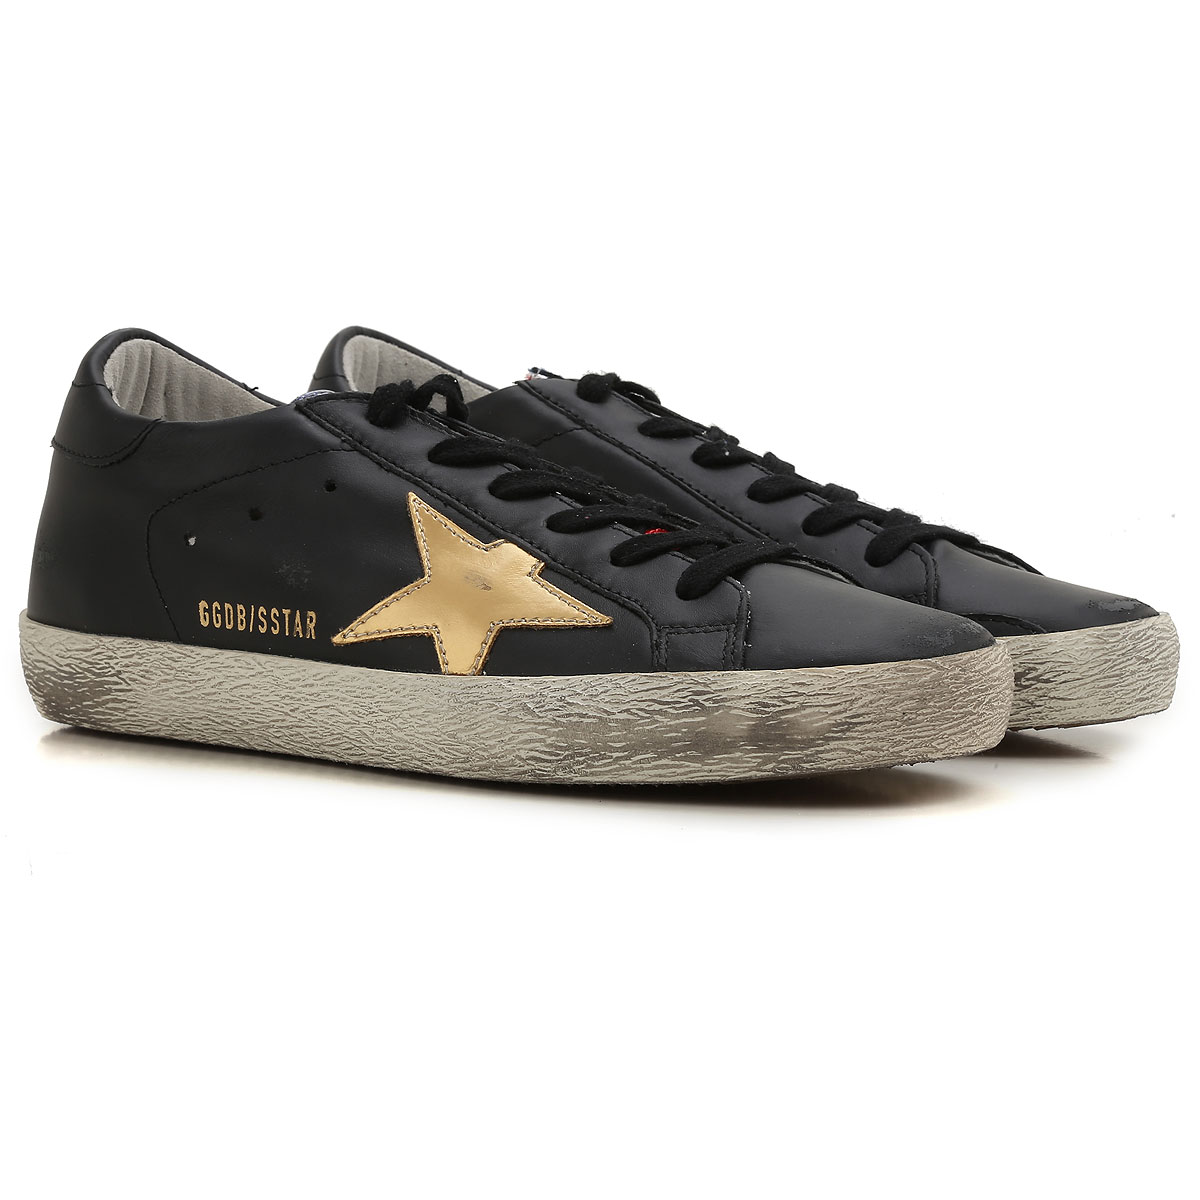 Womens Shoes Golden Goose, Style code: g31ws590-c89-